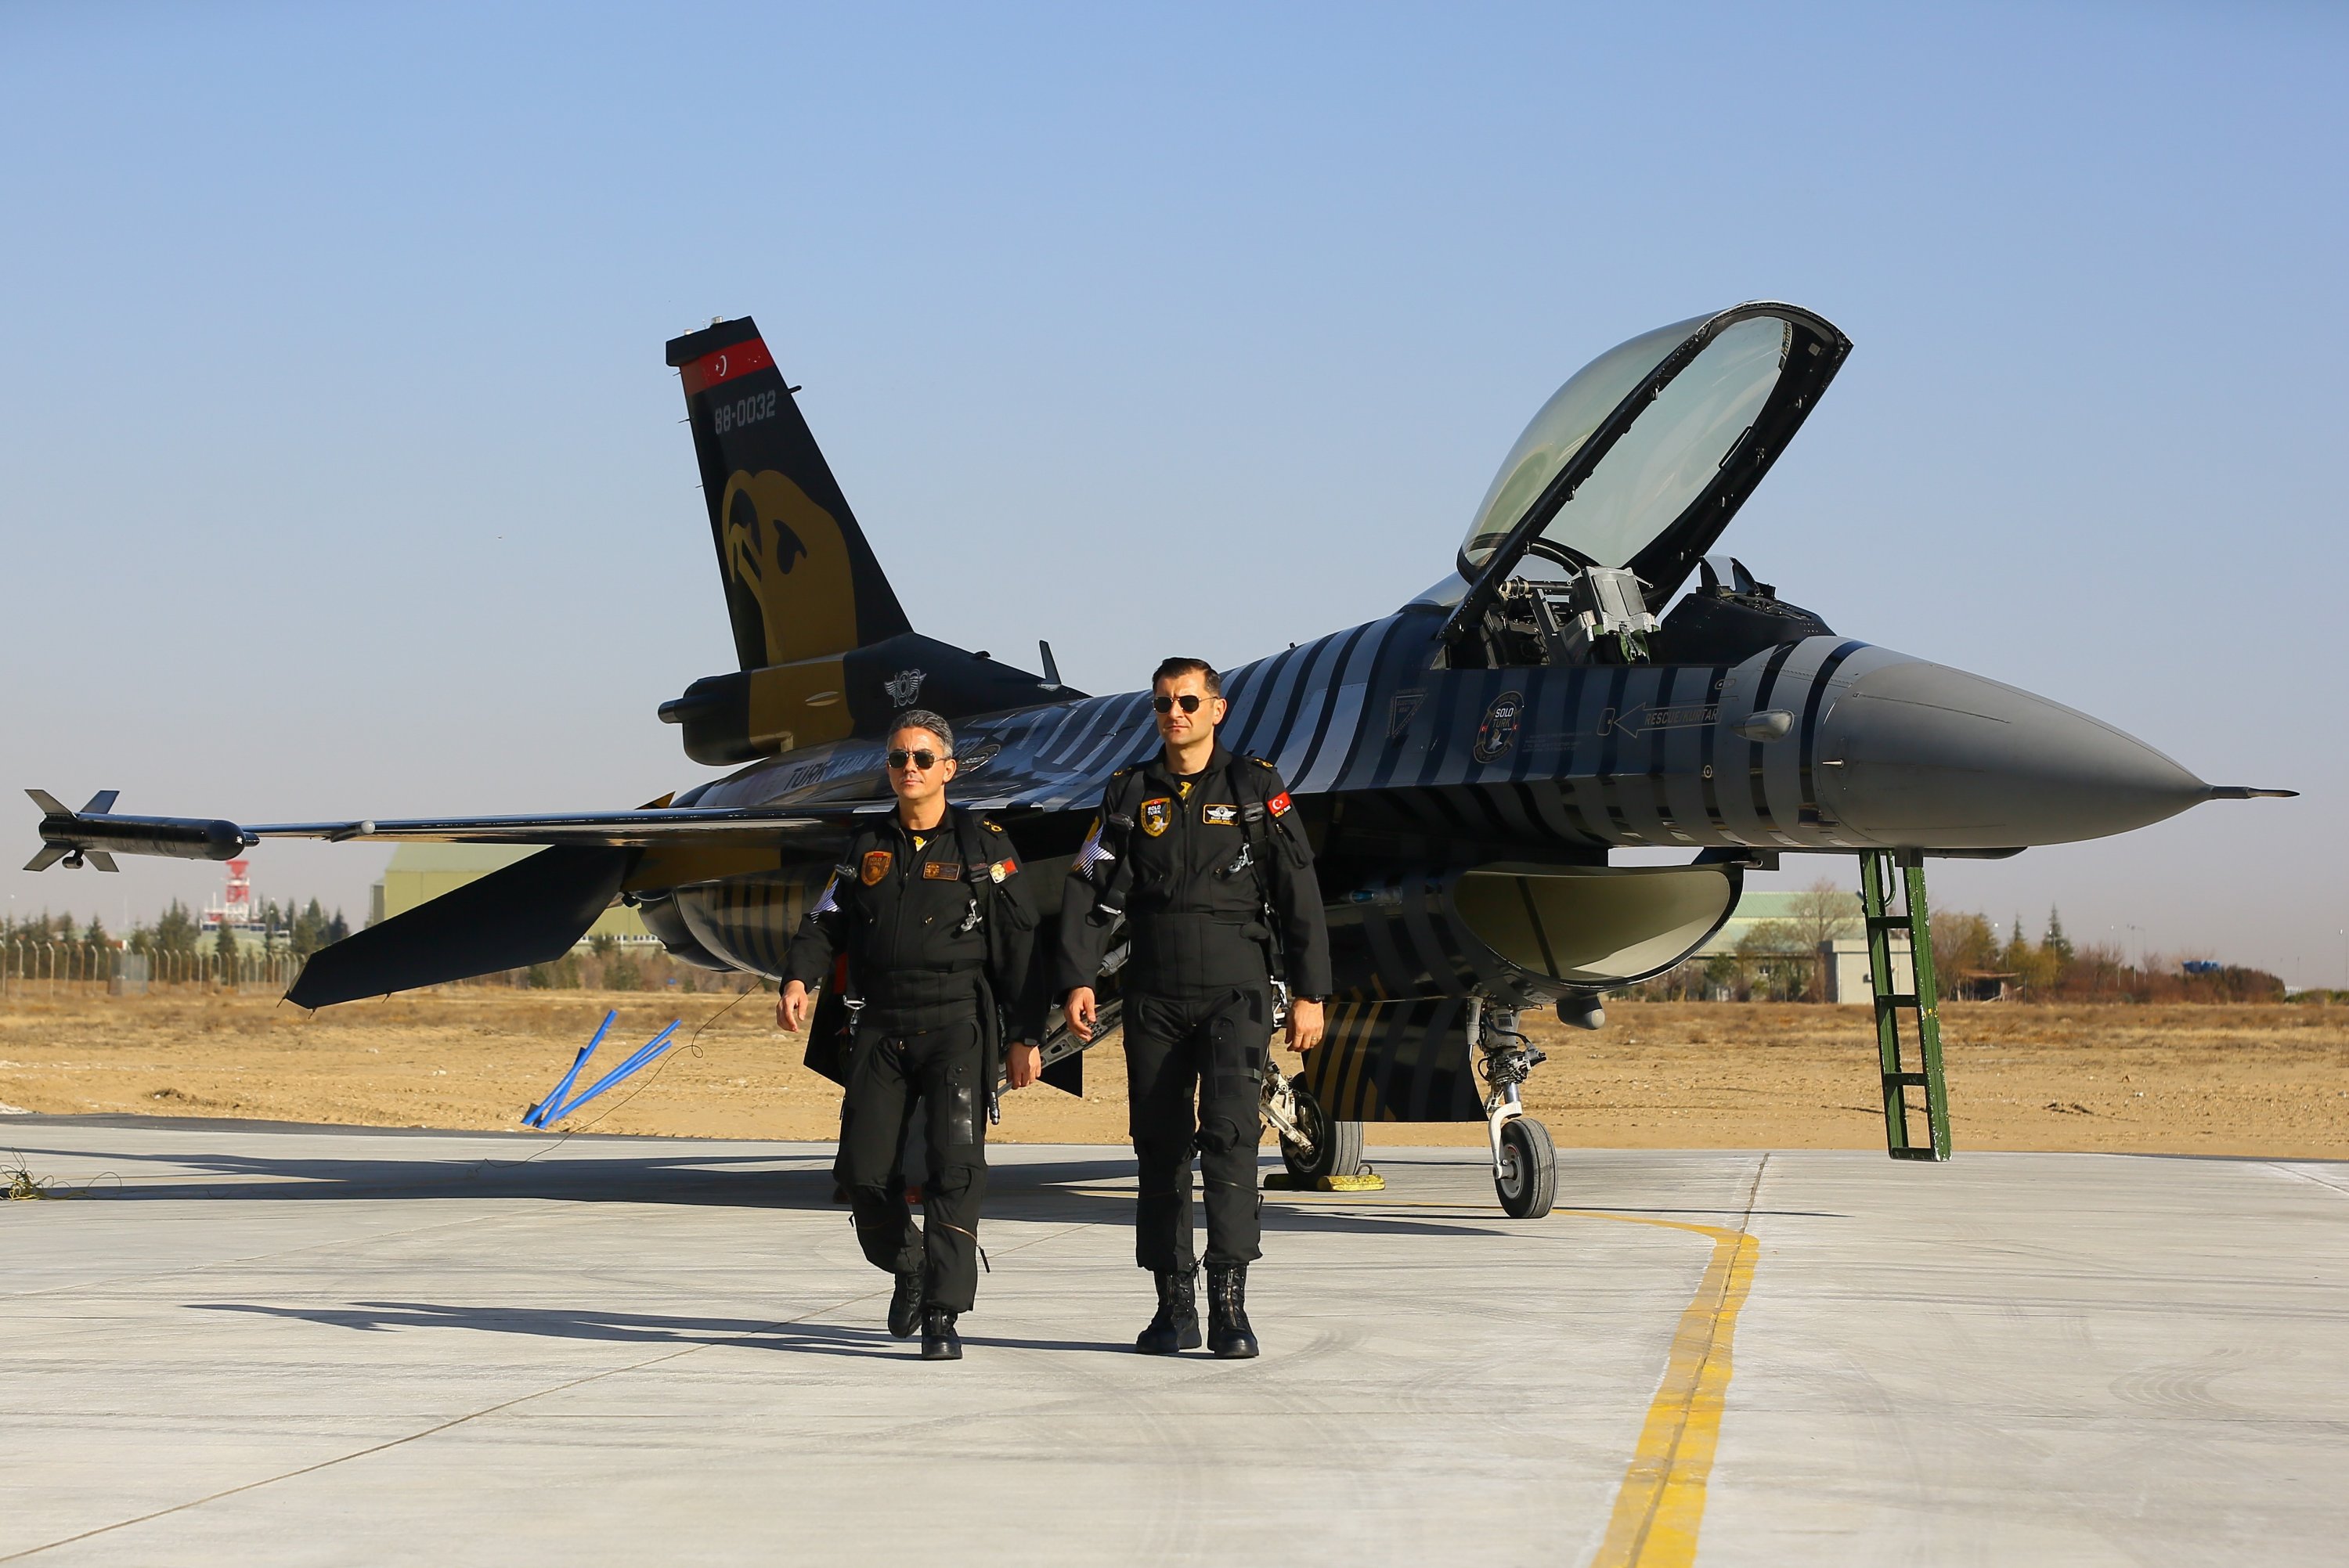 Two members of SOLOTÜRK, the Turkish Air Forces Command's aerobatics team, and their F-16 fighter jet on the tarmac, Ankara, Turkey, Dec. 25, 2021.